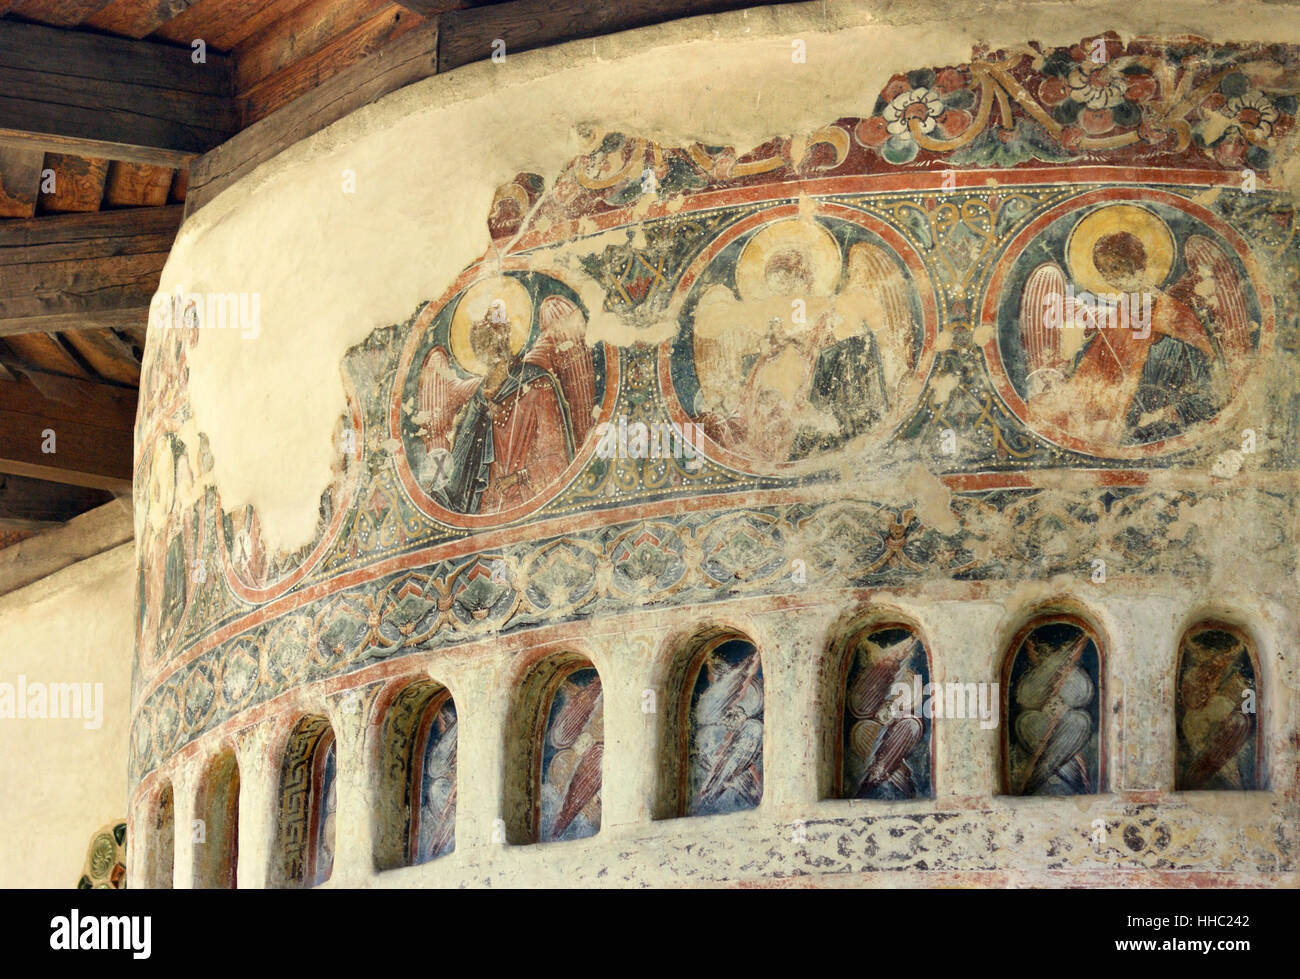 historical, church, art, painting, wall, facade, monastery, affixed, ornate, Stock Photo